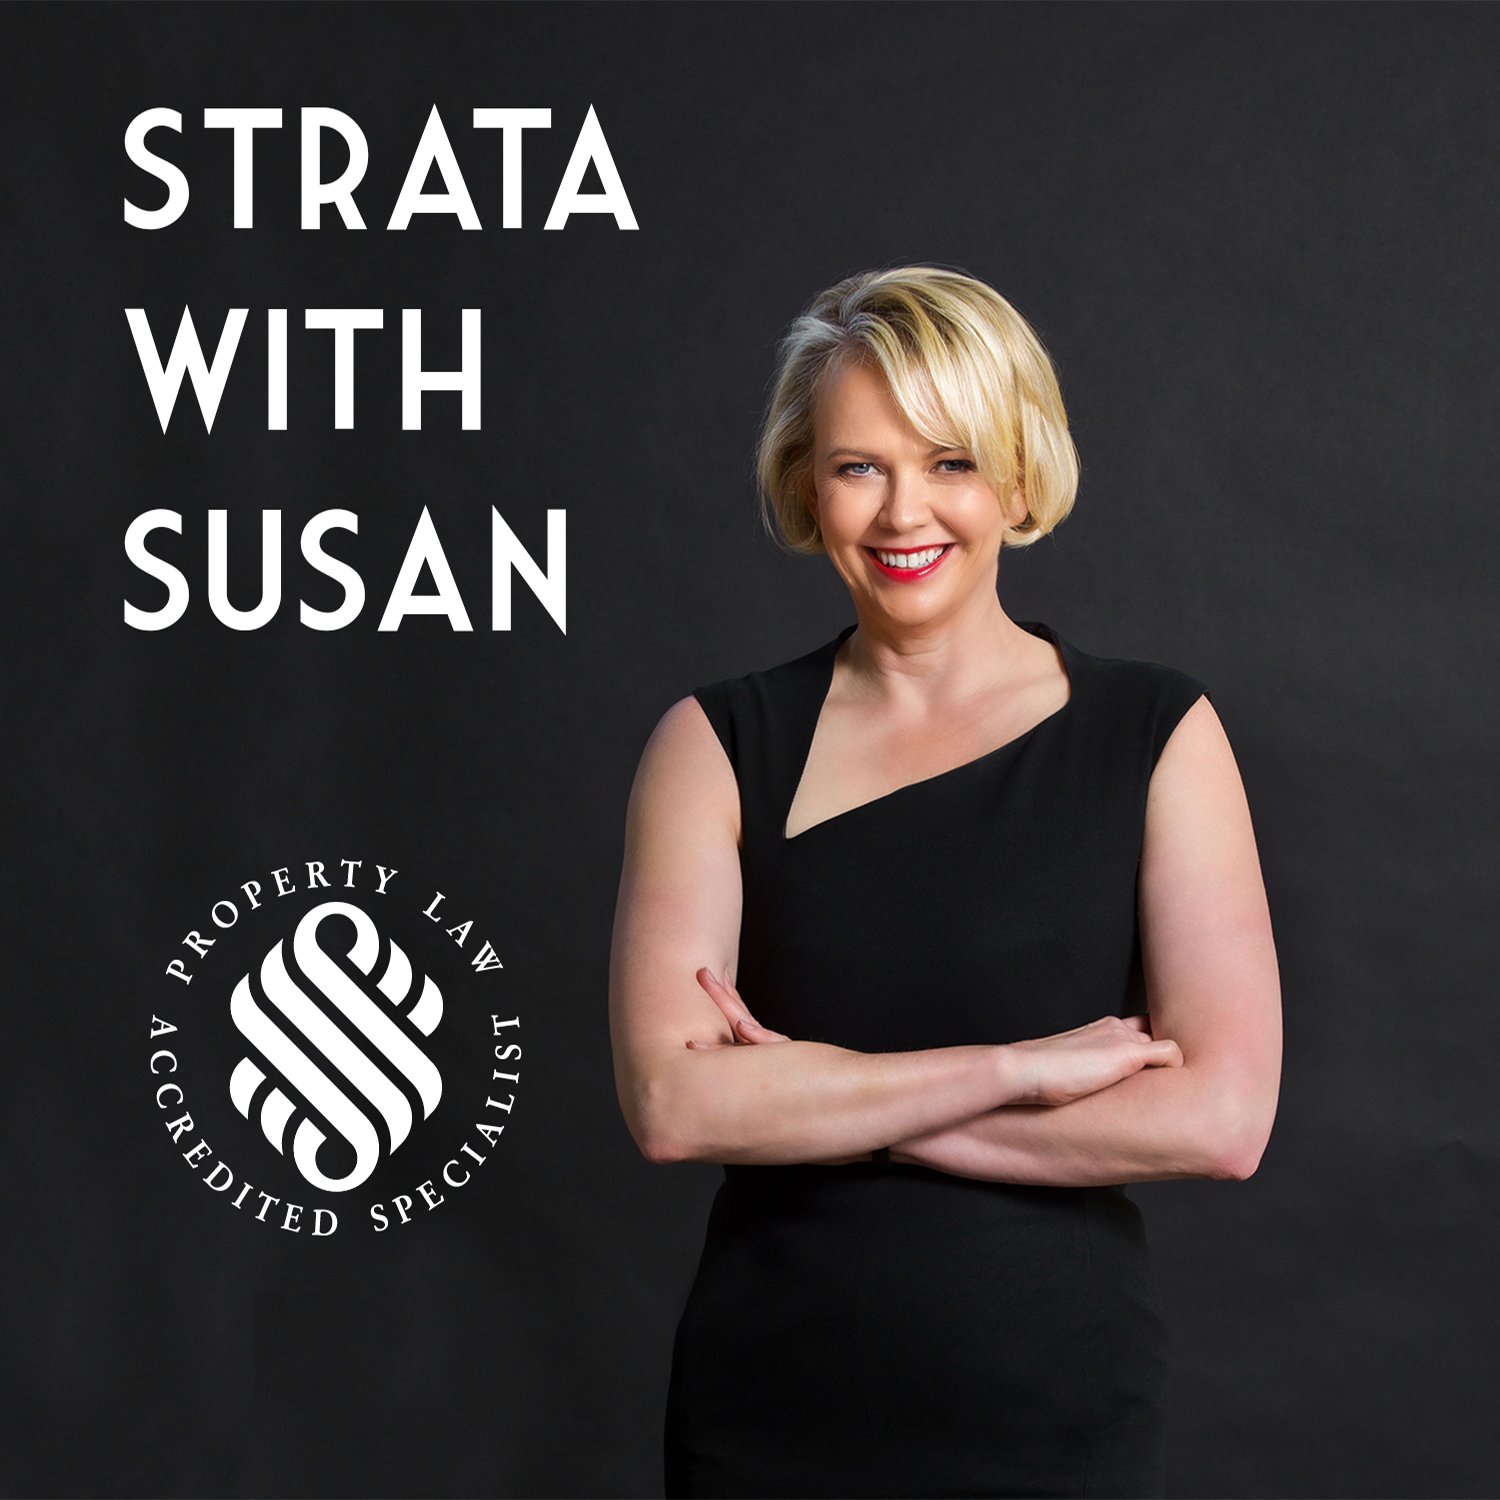 Strata with Susan